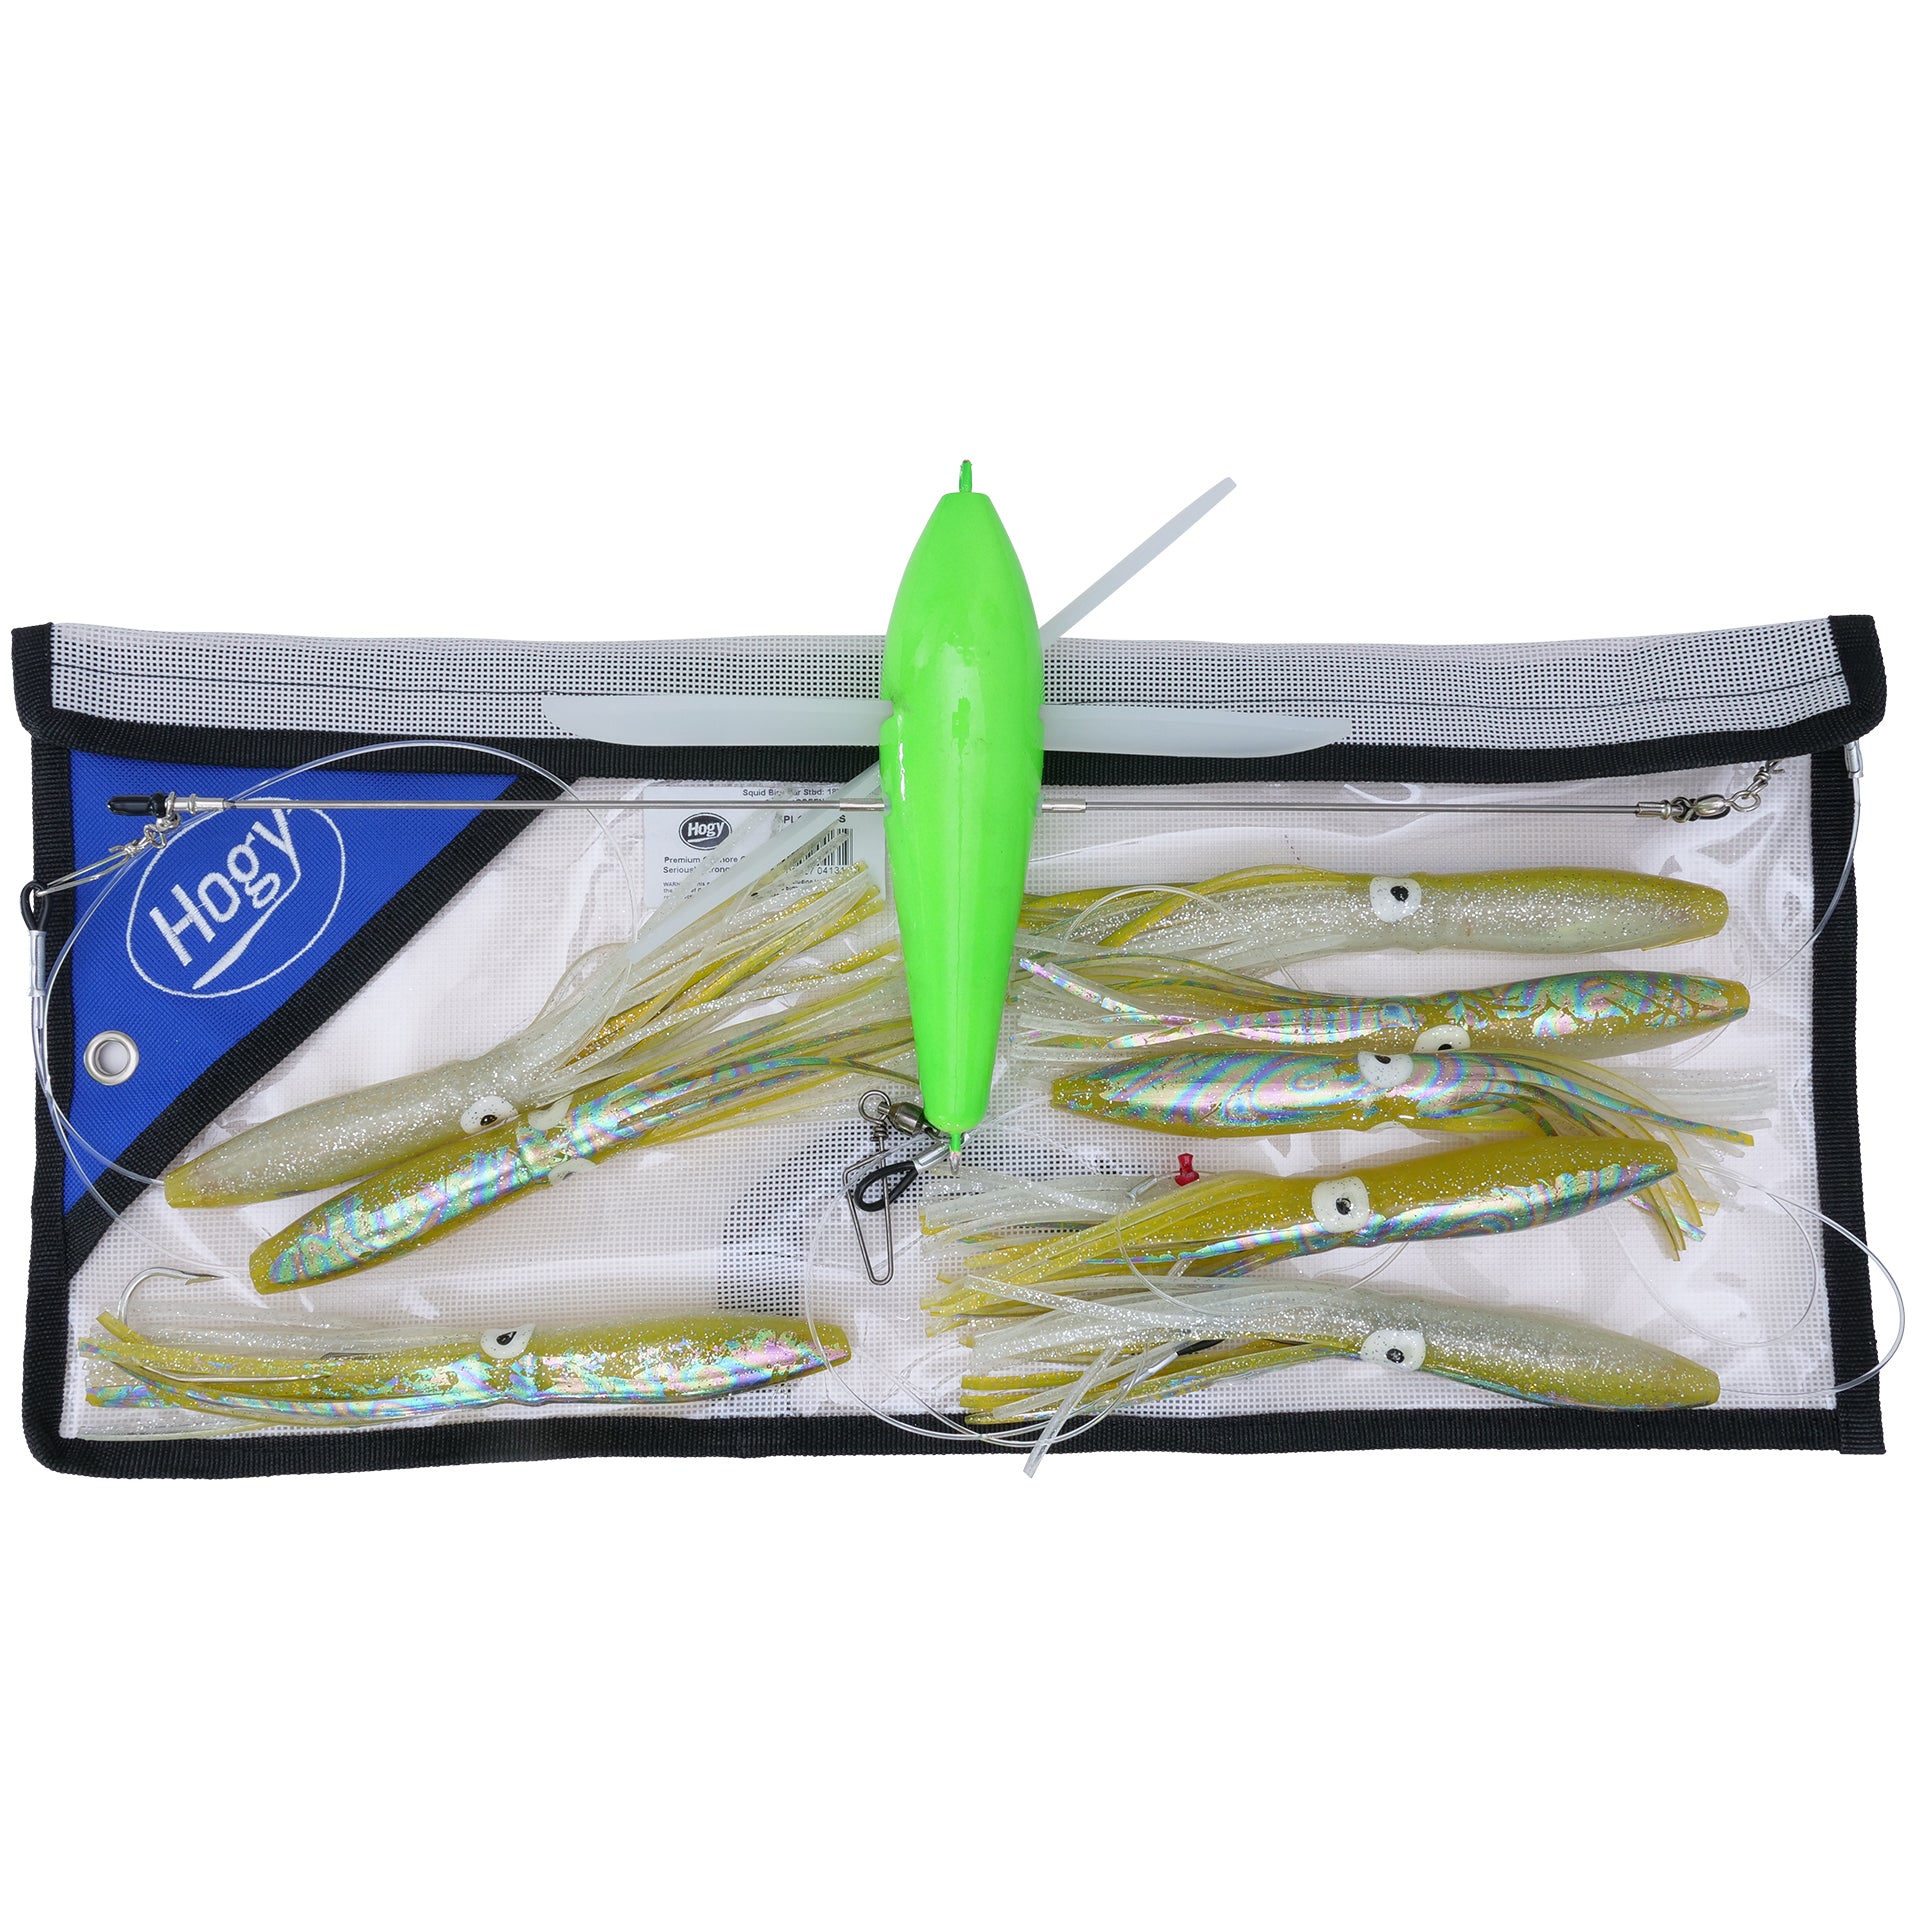 Game Fishing Tackle Online - Lures - Teasers & more - NZ Wide